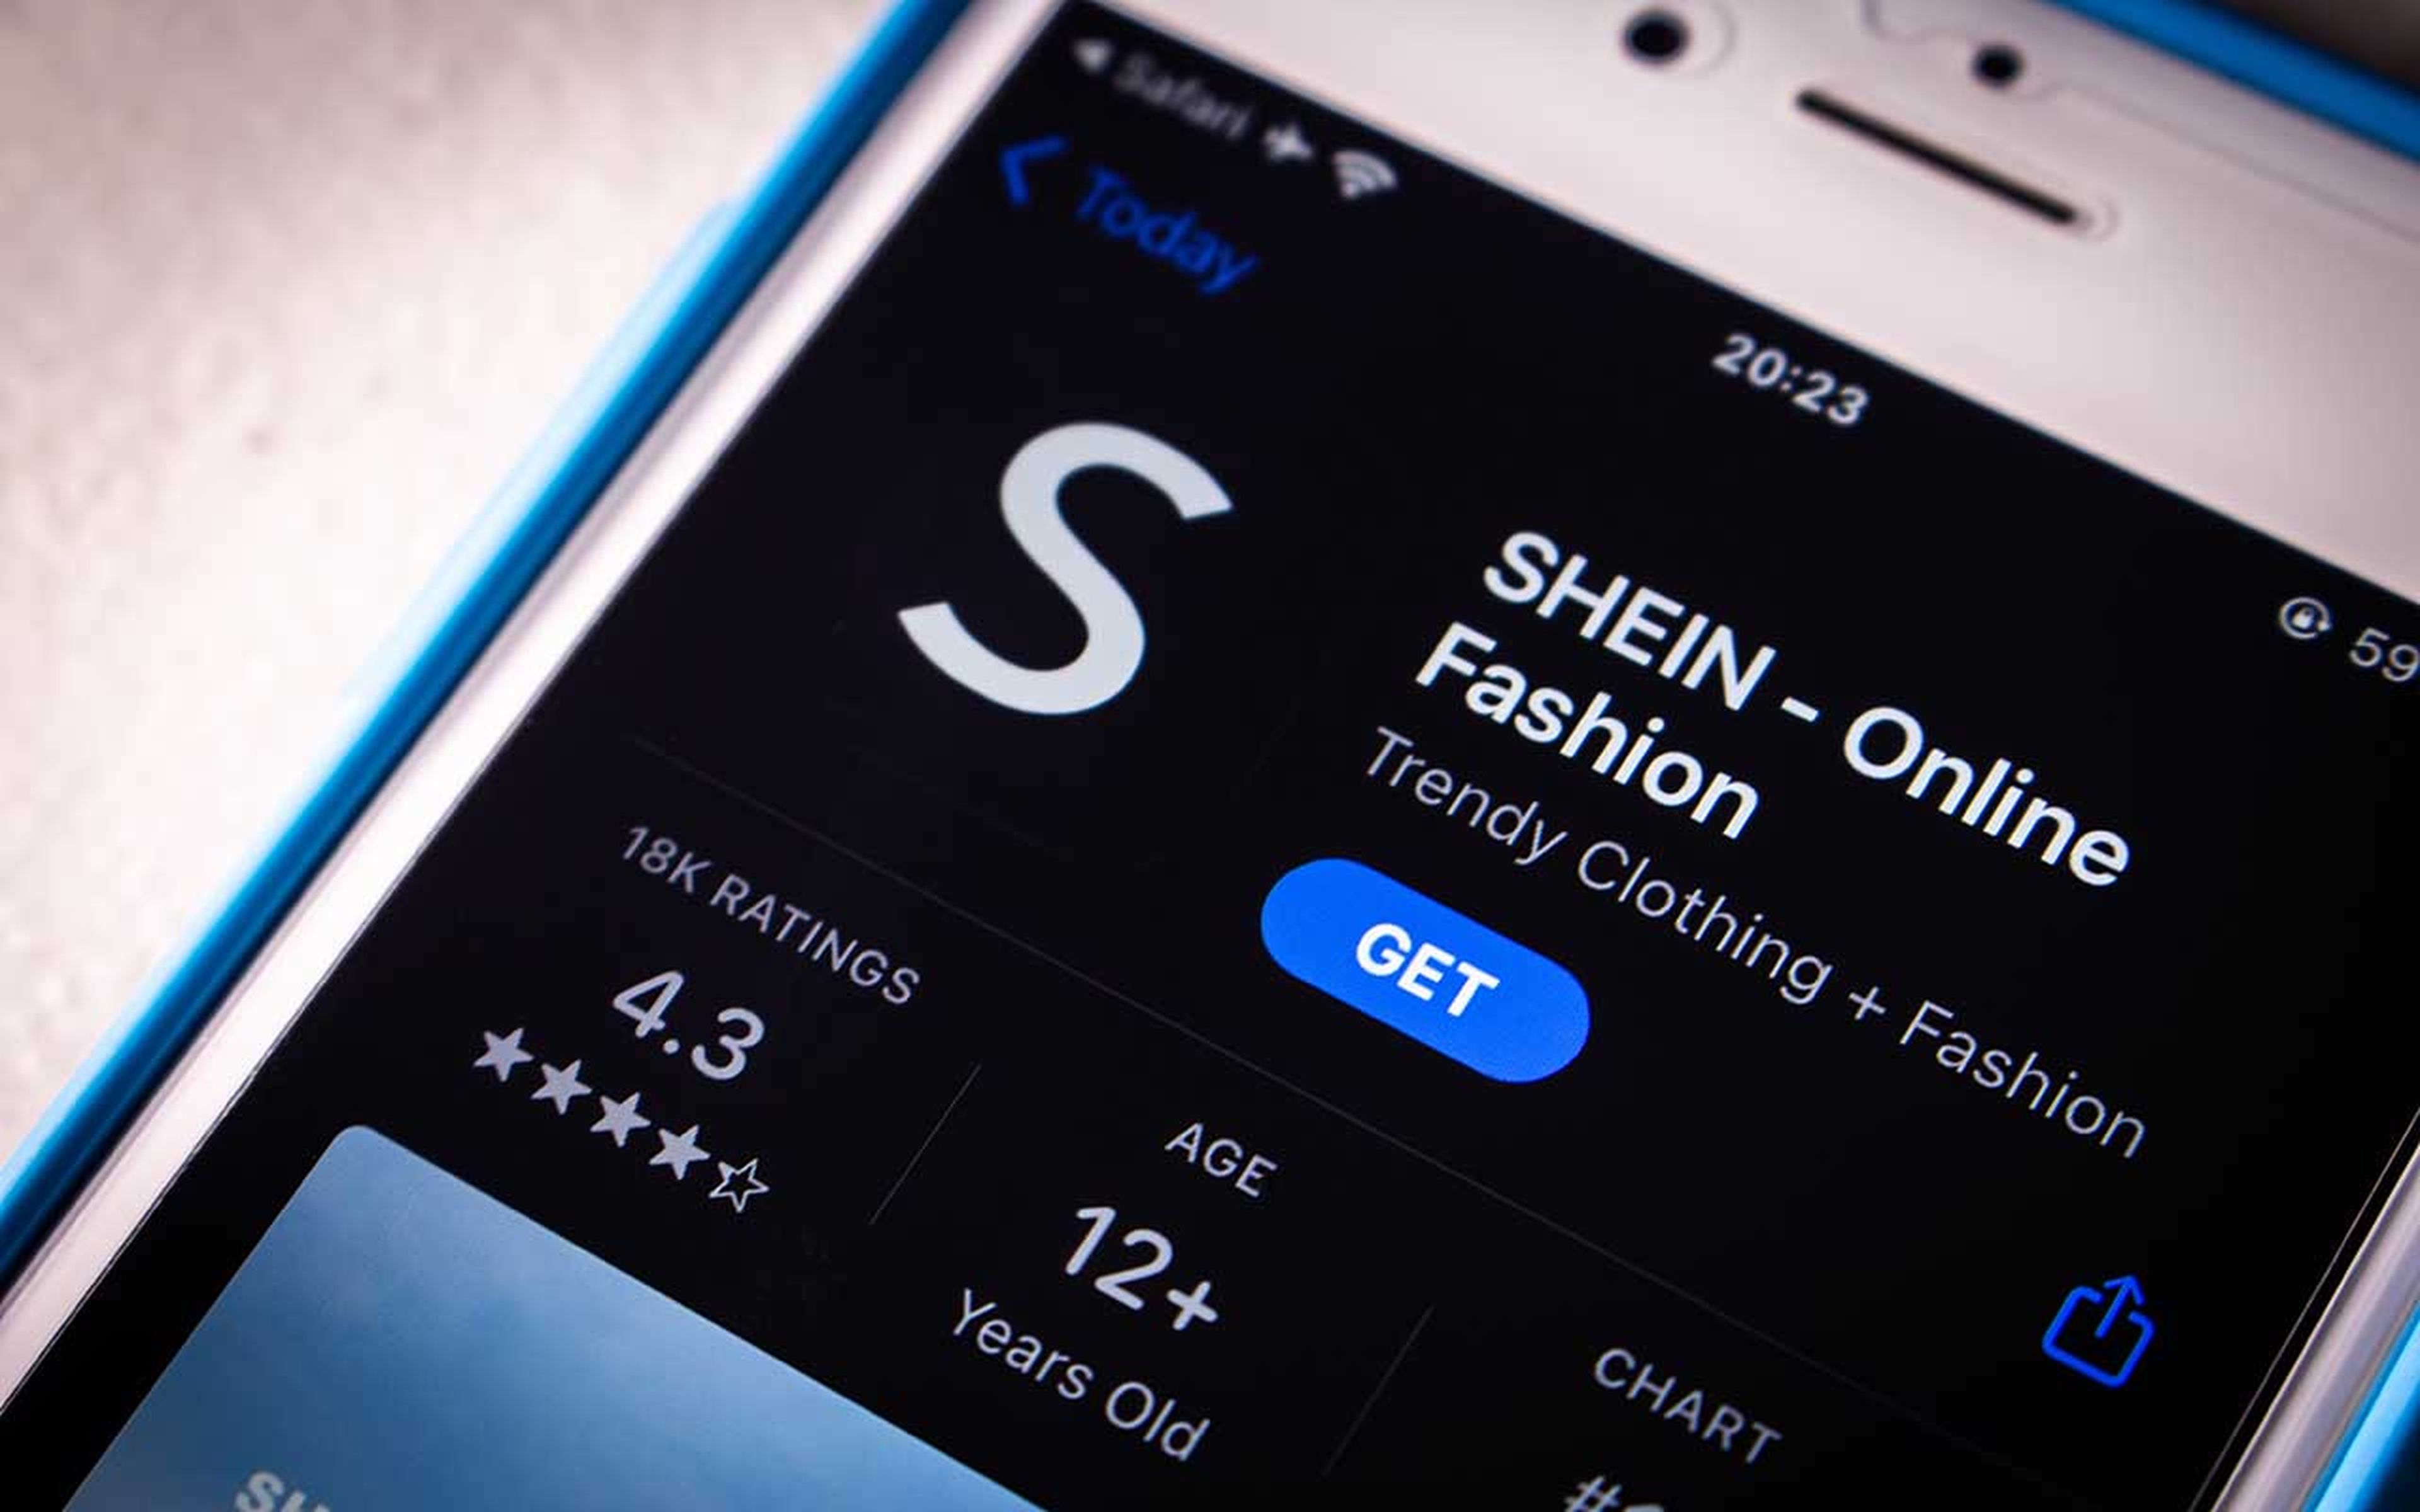 A closeup app icon of Shein, a Chinese fast fashion online fast fashion retailer, in an app store.